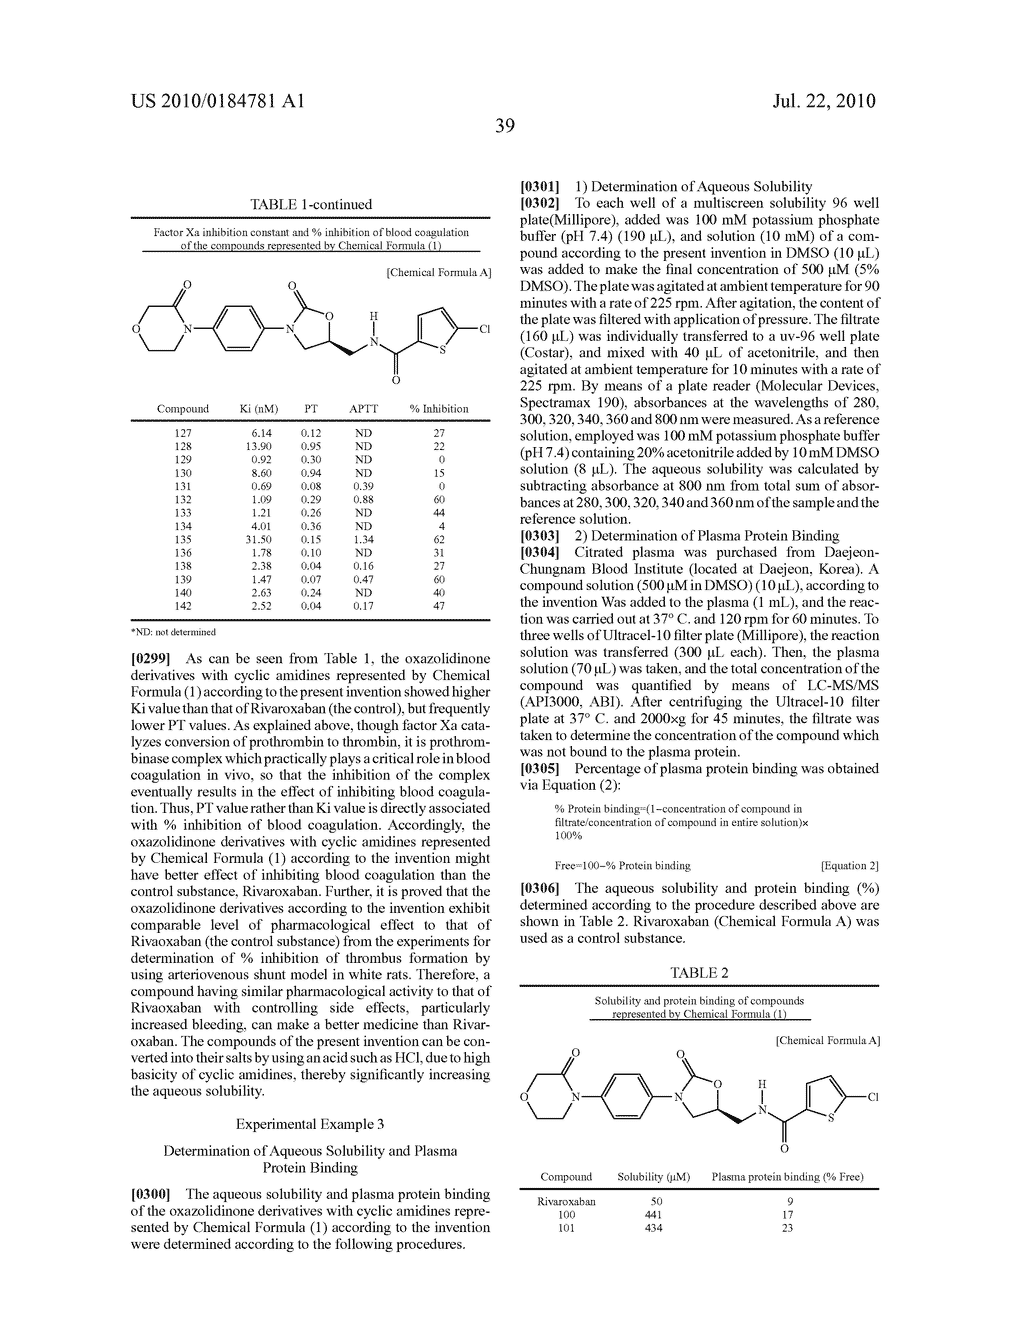 FXA INHIBITORS WITH CYCLIC AMIDINES AS P4 SUBUNIT, PROCESSES FOR THEIR PREPARATIONS, AND PHARMACEUTICAL COMPOSITIONS AND DERIVATIVES THEREOF - diagram, schematic, and image 41